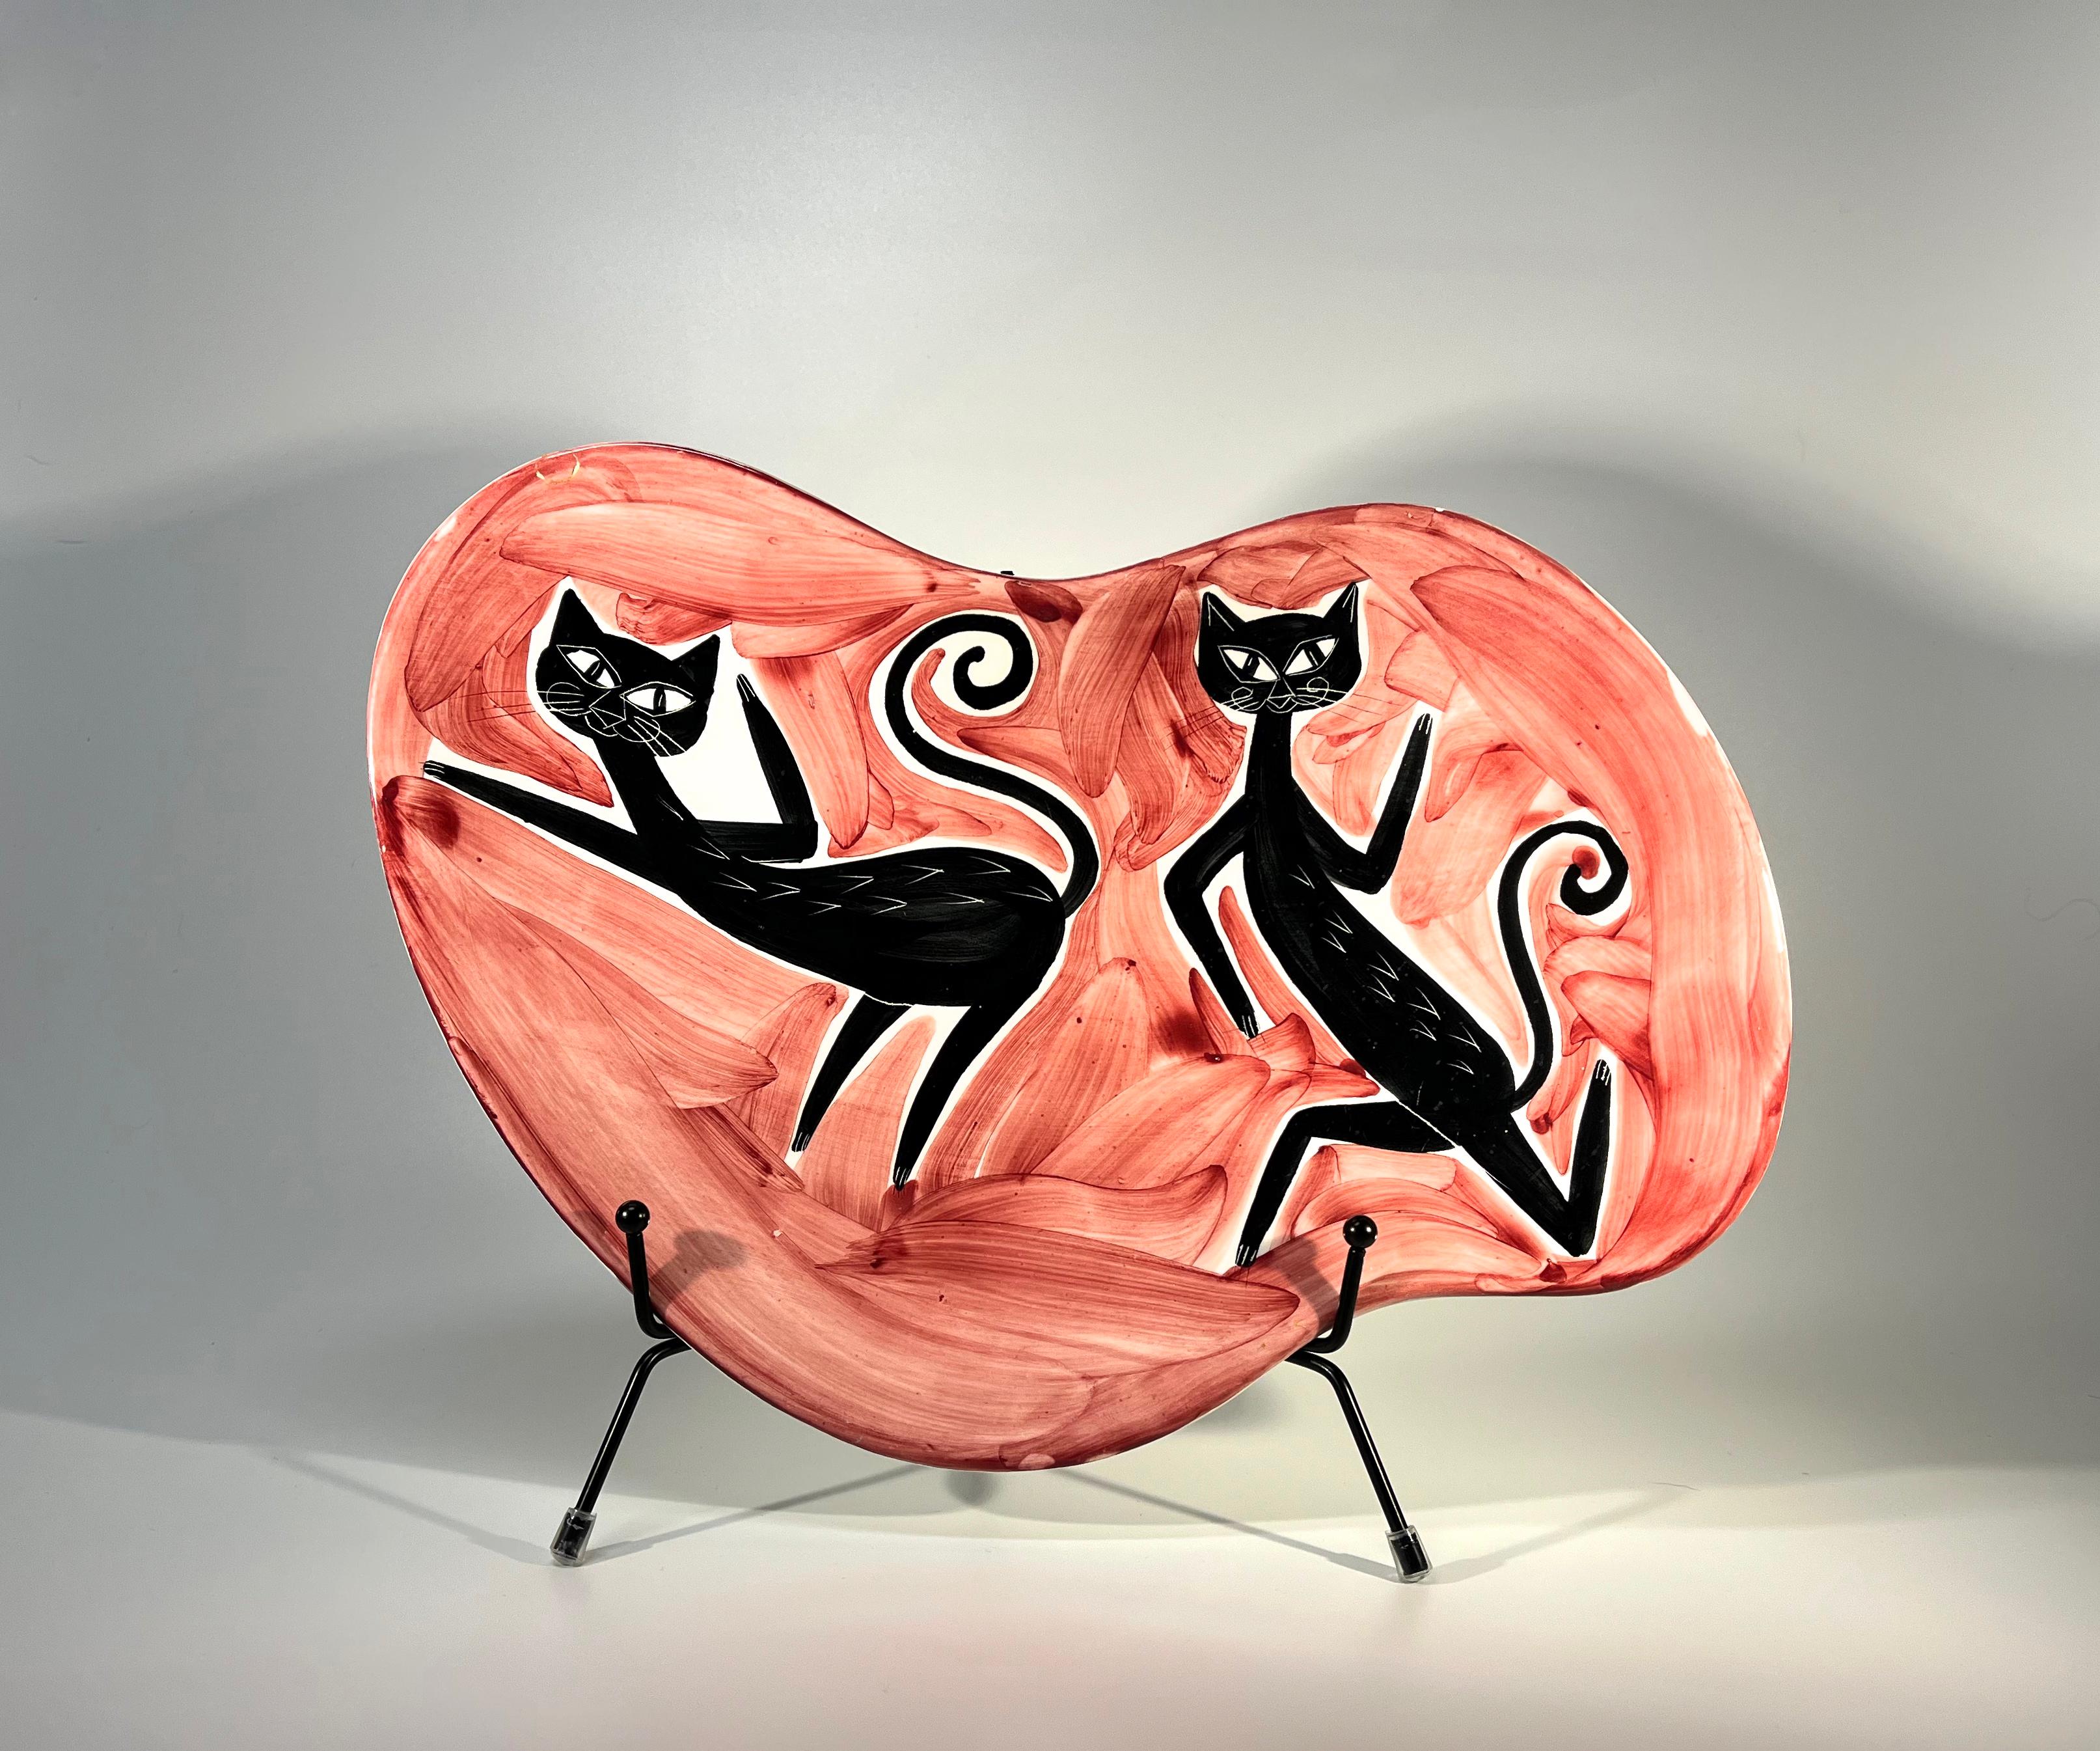 Alley cats ceramic platter attributed to Alessio Tasca of Nove, Italy
Depicts two animated felines with characteristic Tasca markings 
Likely created for Raymor, who specialised in mid-century decorative arts 
Hand painted in Rossa pink and